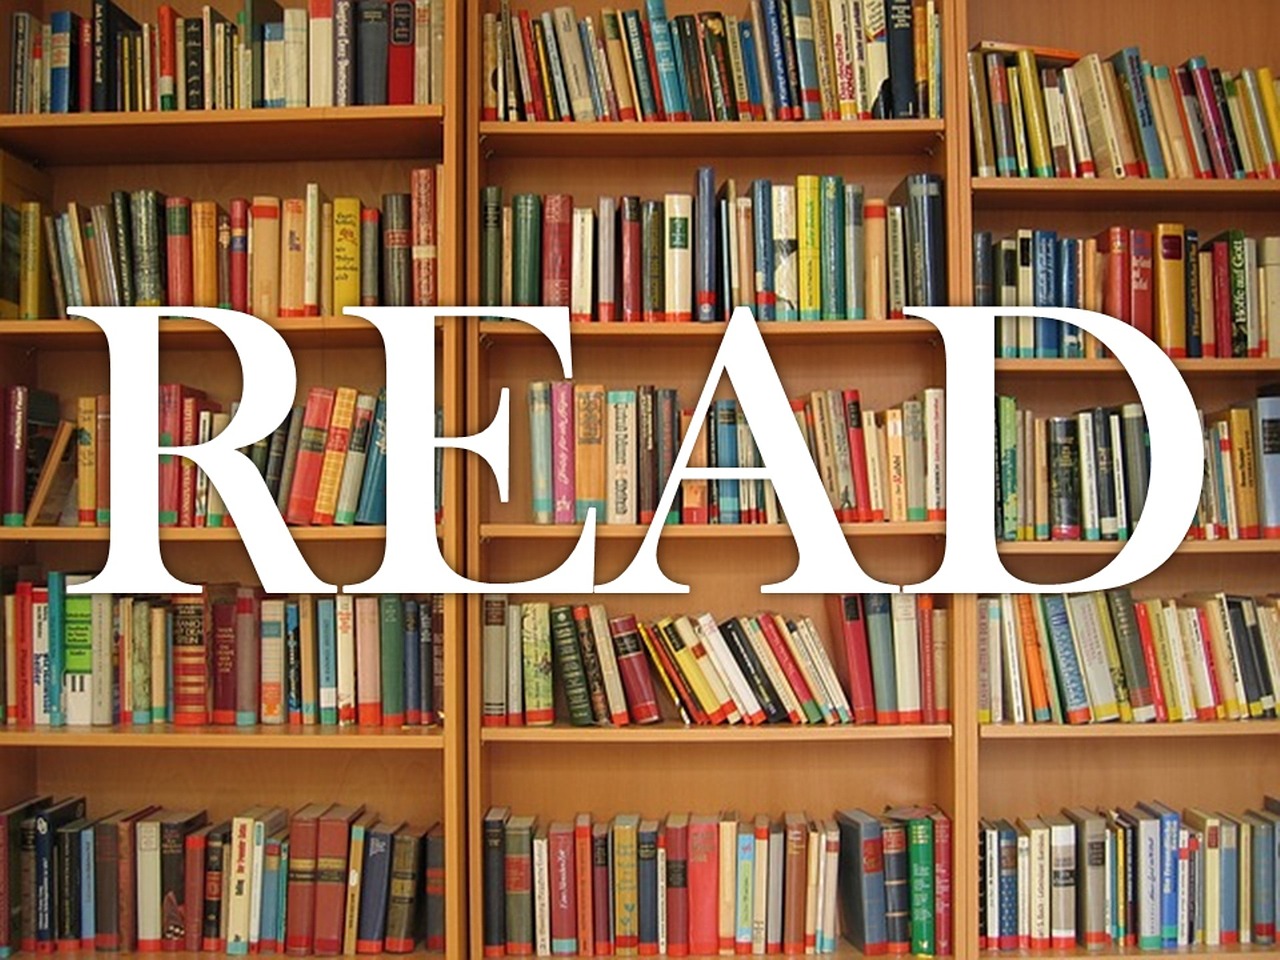 Image of book shelves with the word READ printed across them